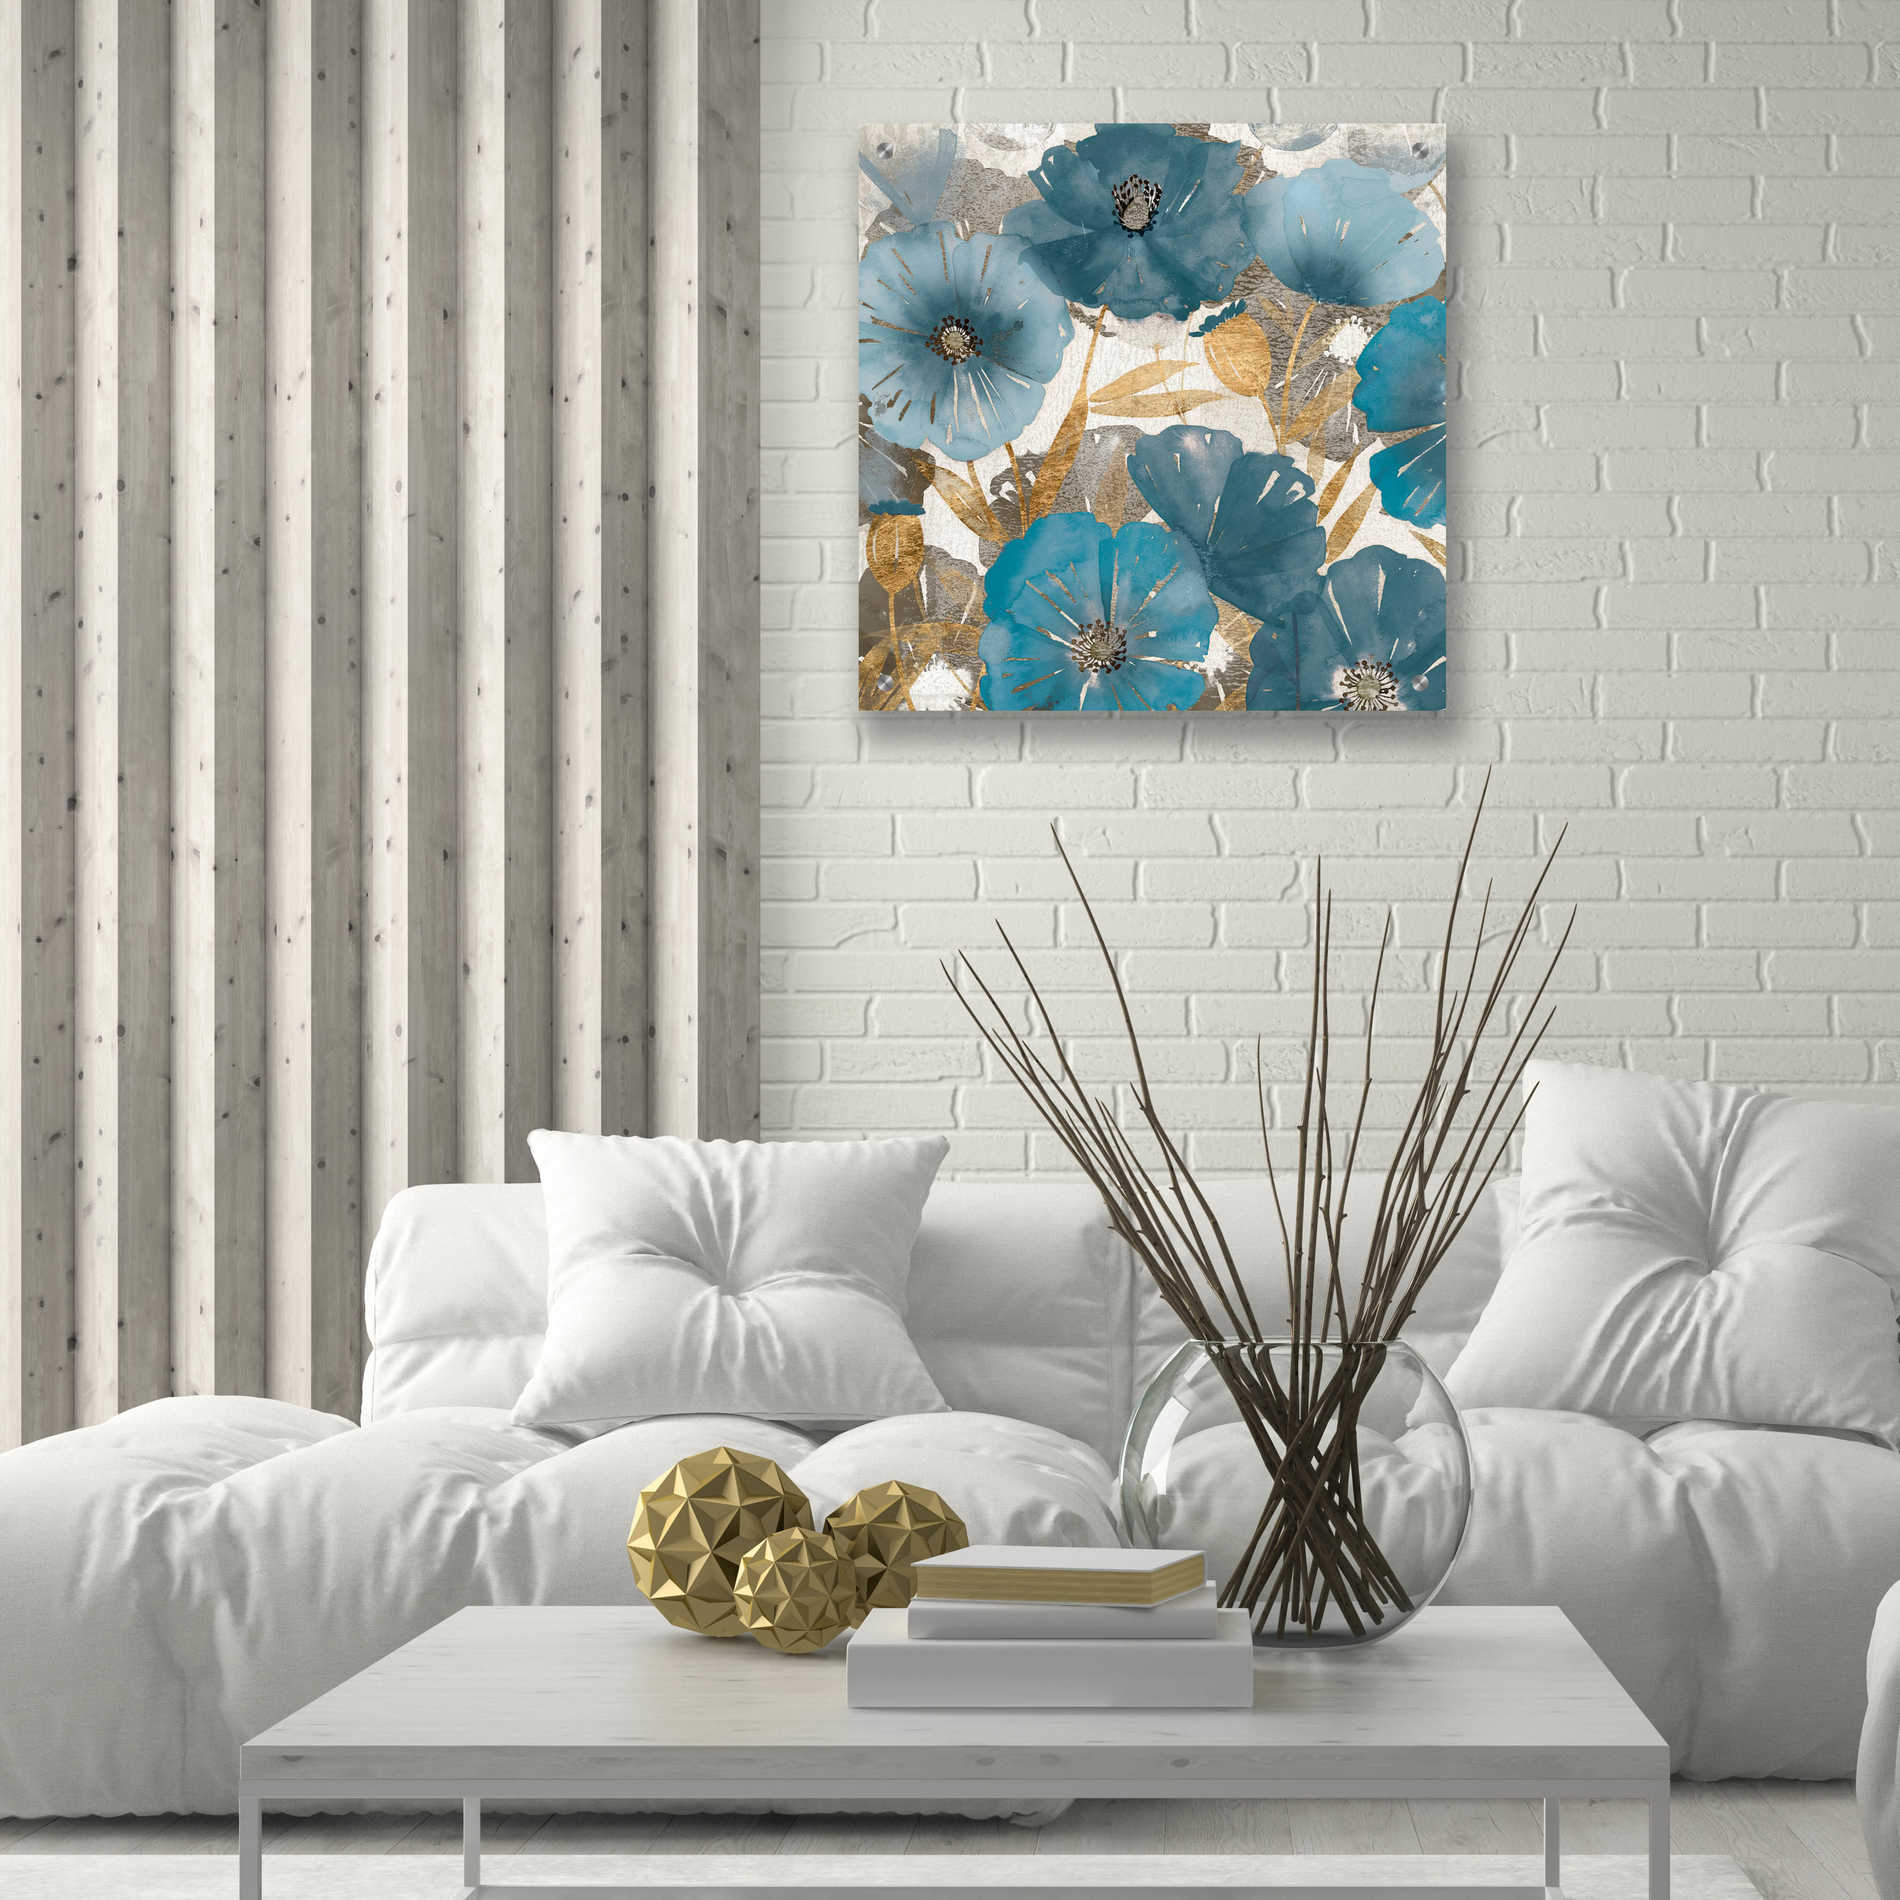 Epic Art 'Blue and Gold Poppies I' by Studio W, Acrylic Glass Wall Art,24x24